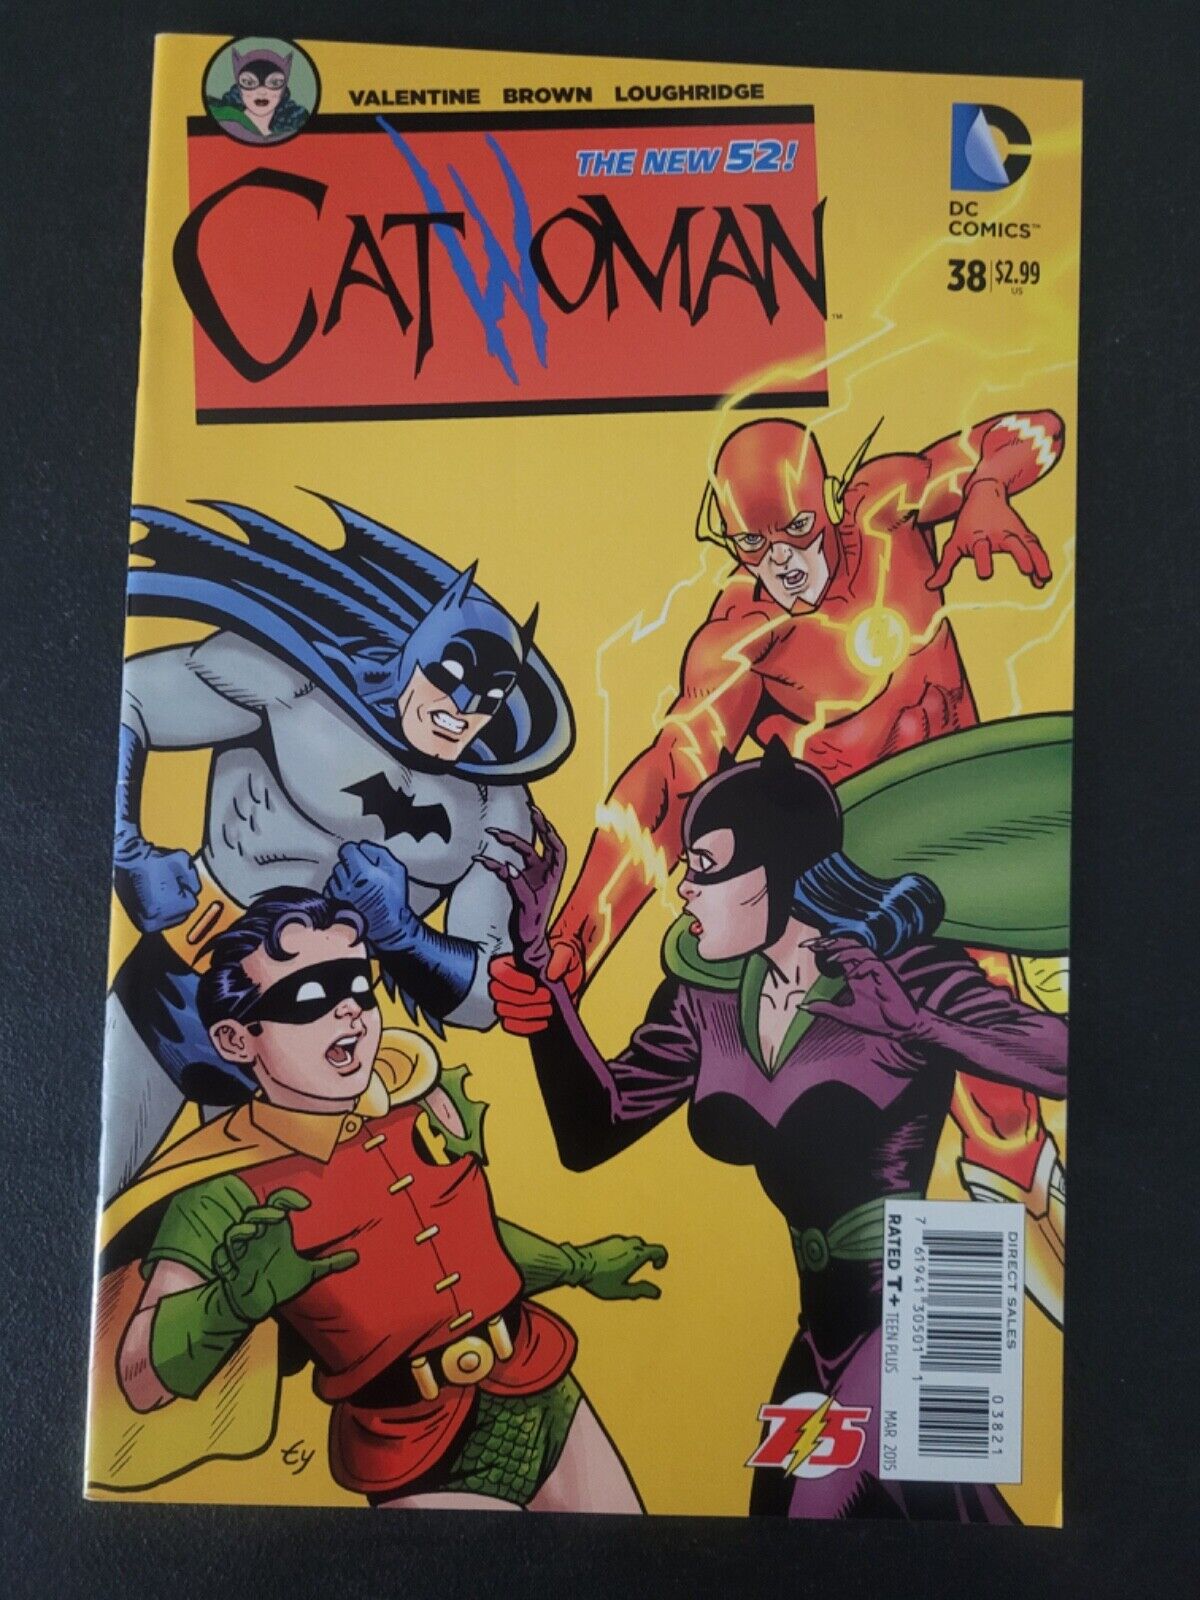 CATWOMAN #38 (2014) DC 52 COMICS THE FLASH 75TH ANNIVERSARY VARIANT COVER